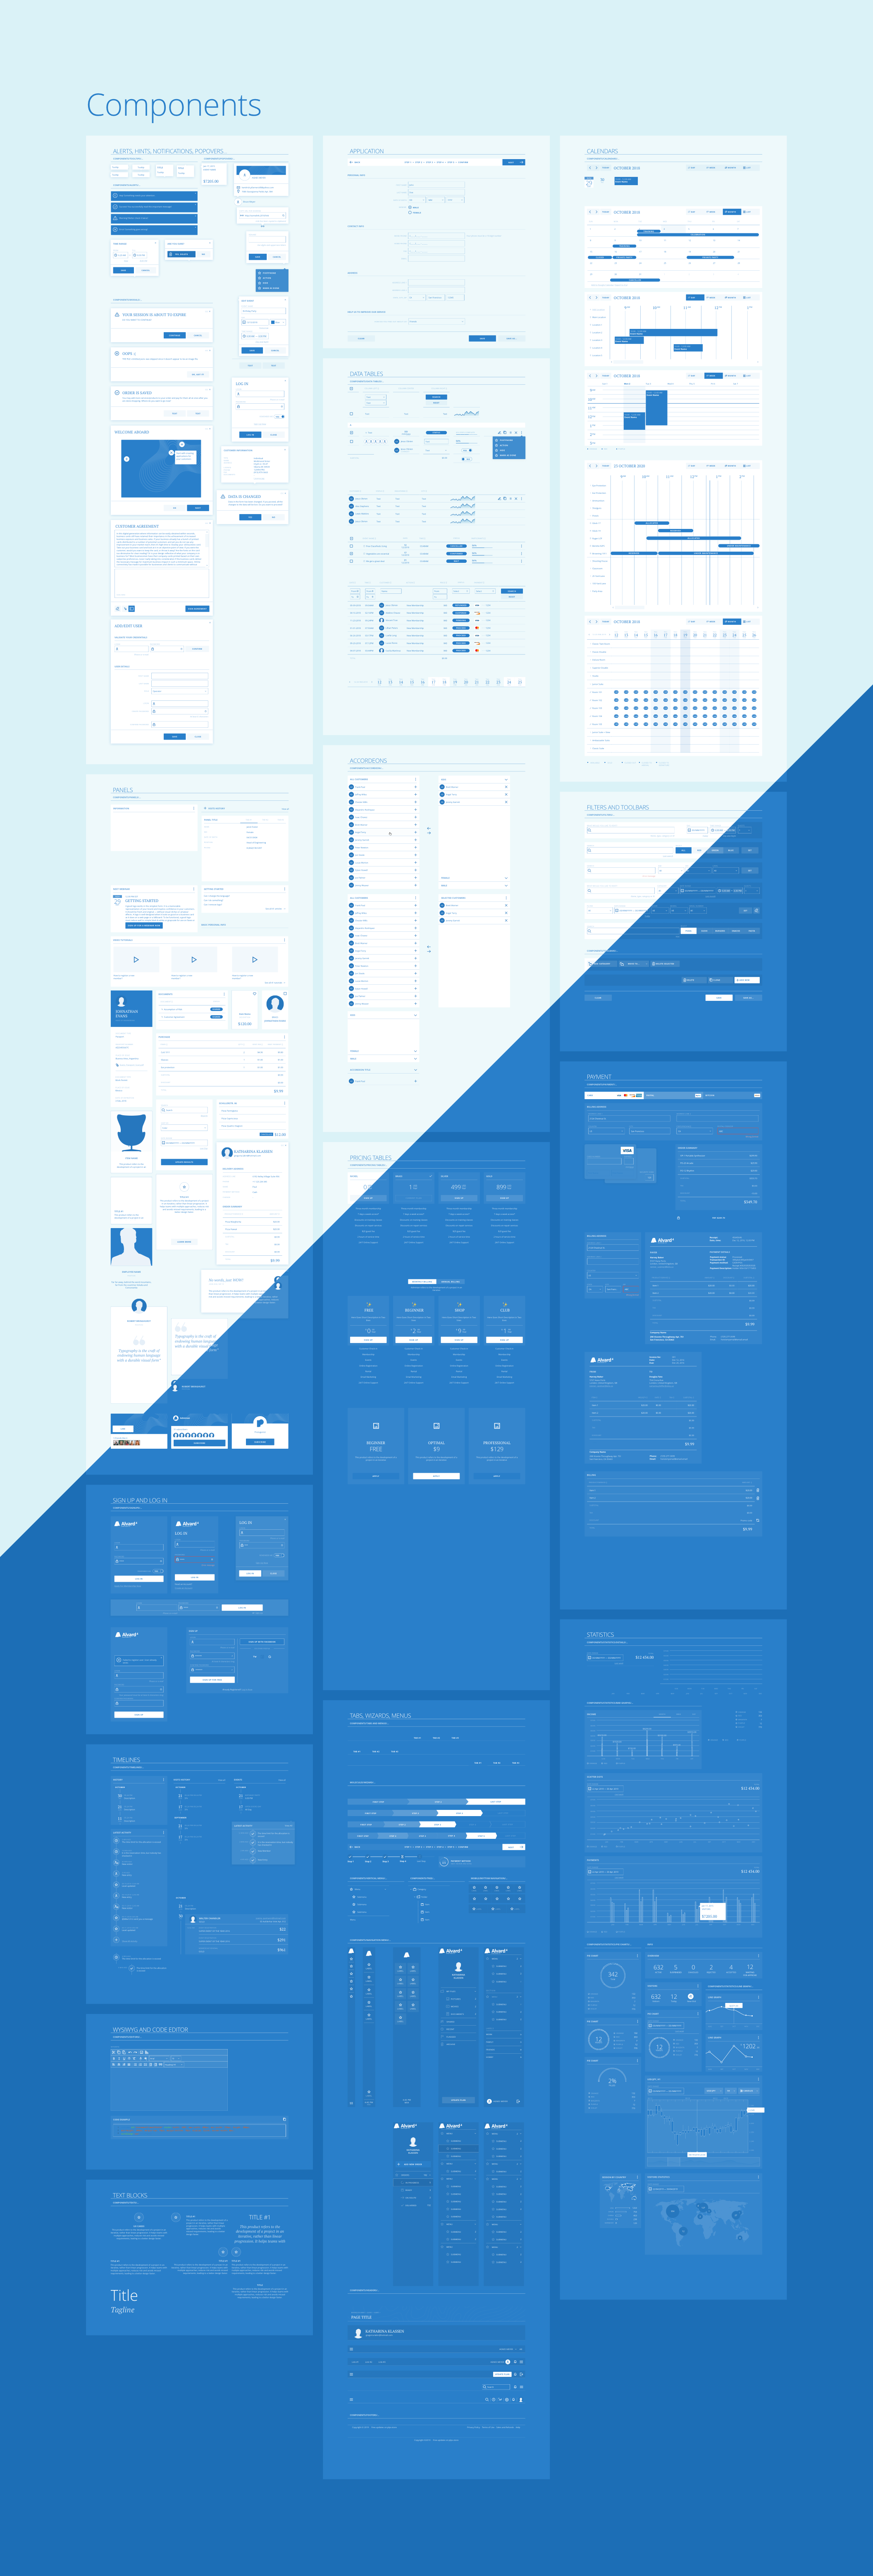 Alvard 4 Wireframe Kit - Collection of Symbols and Templates for Sketch - 6